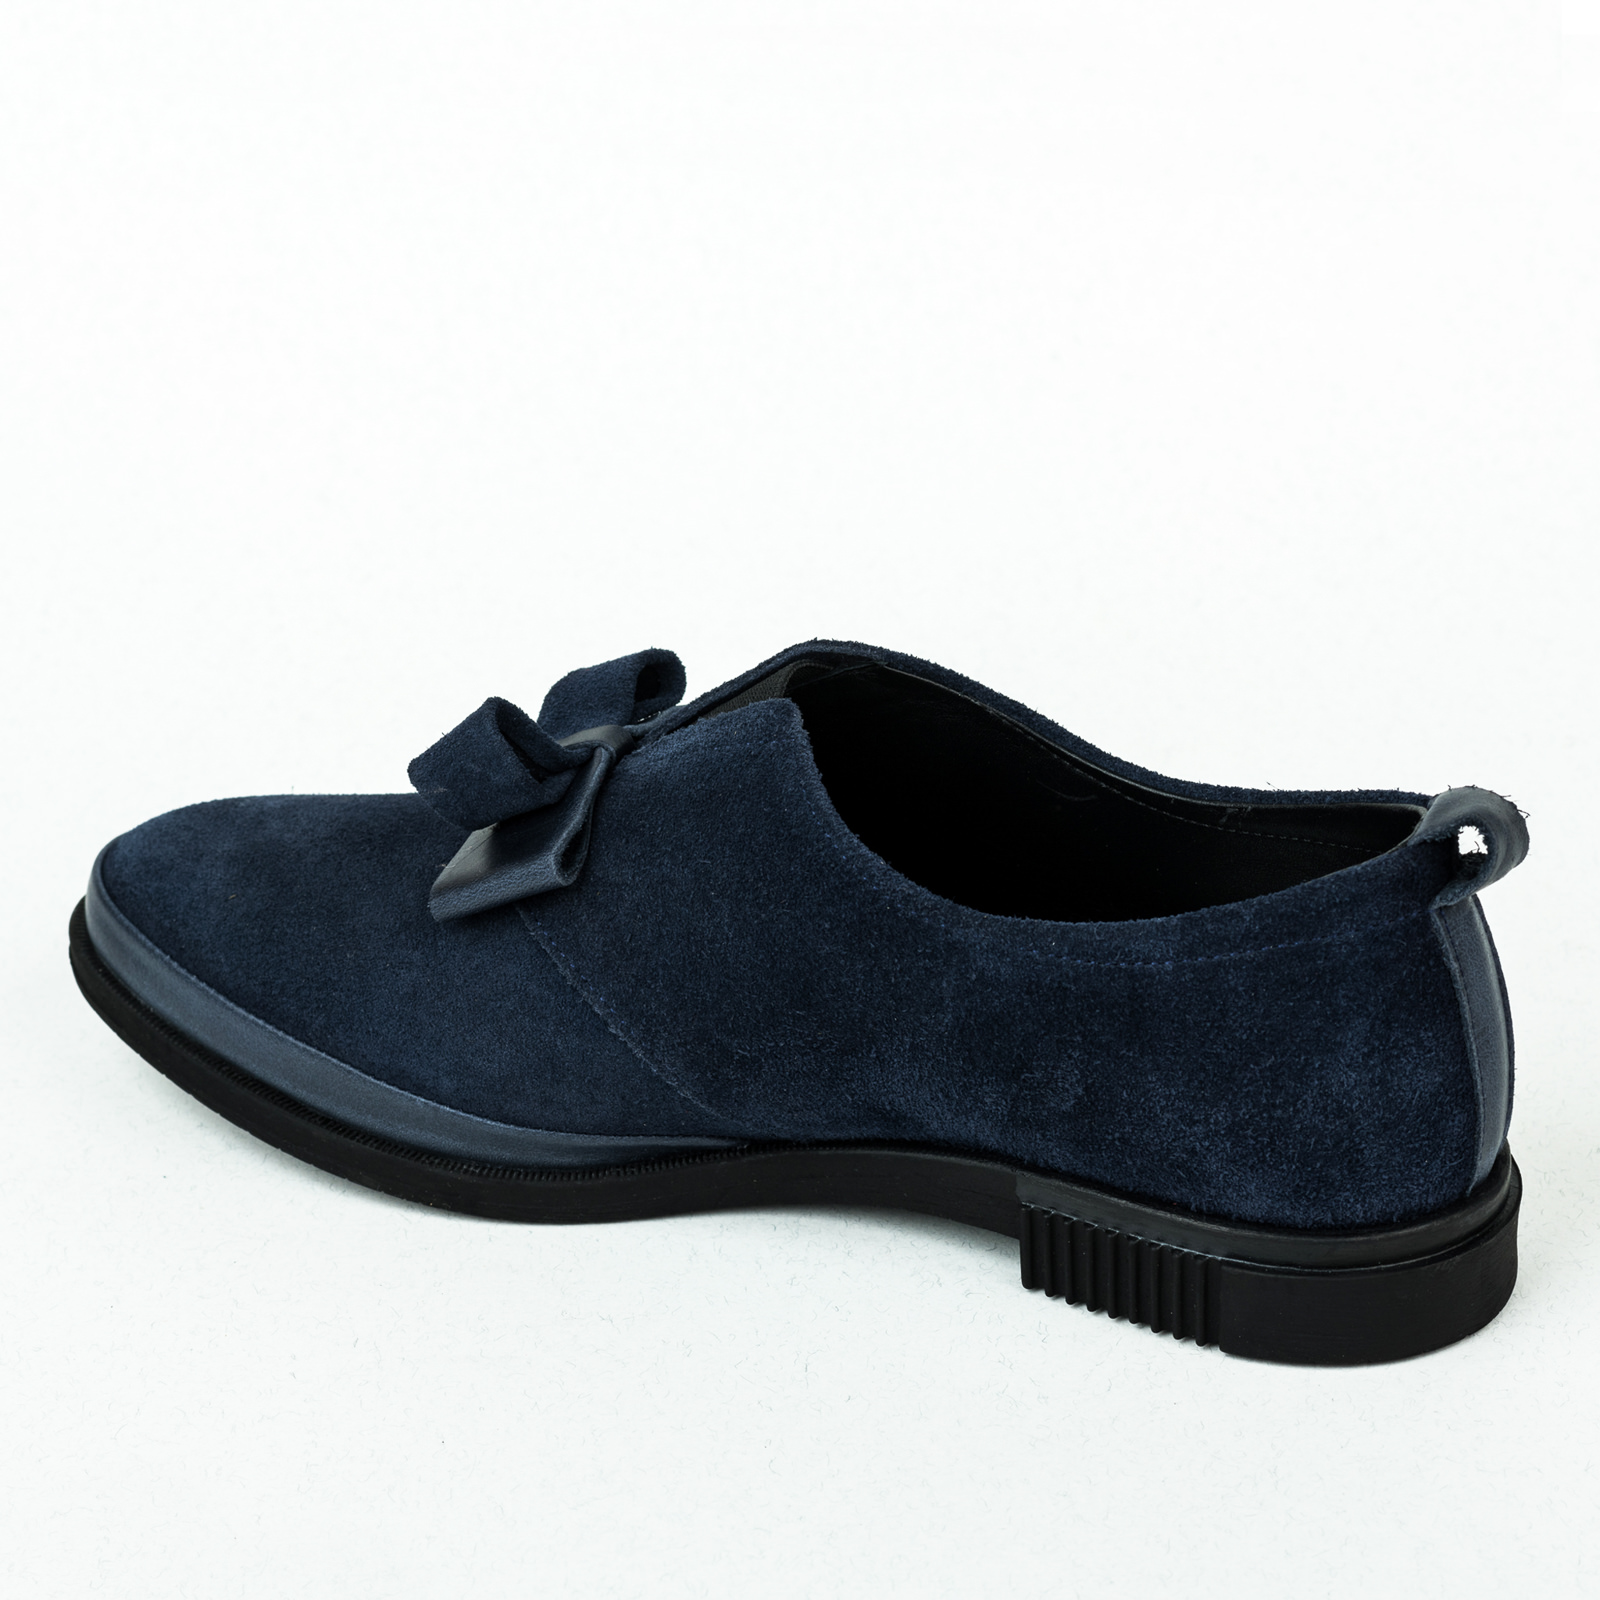 Leather shoes & flats B016 - NAVY